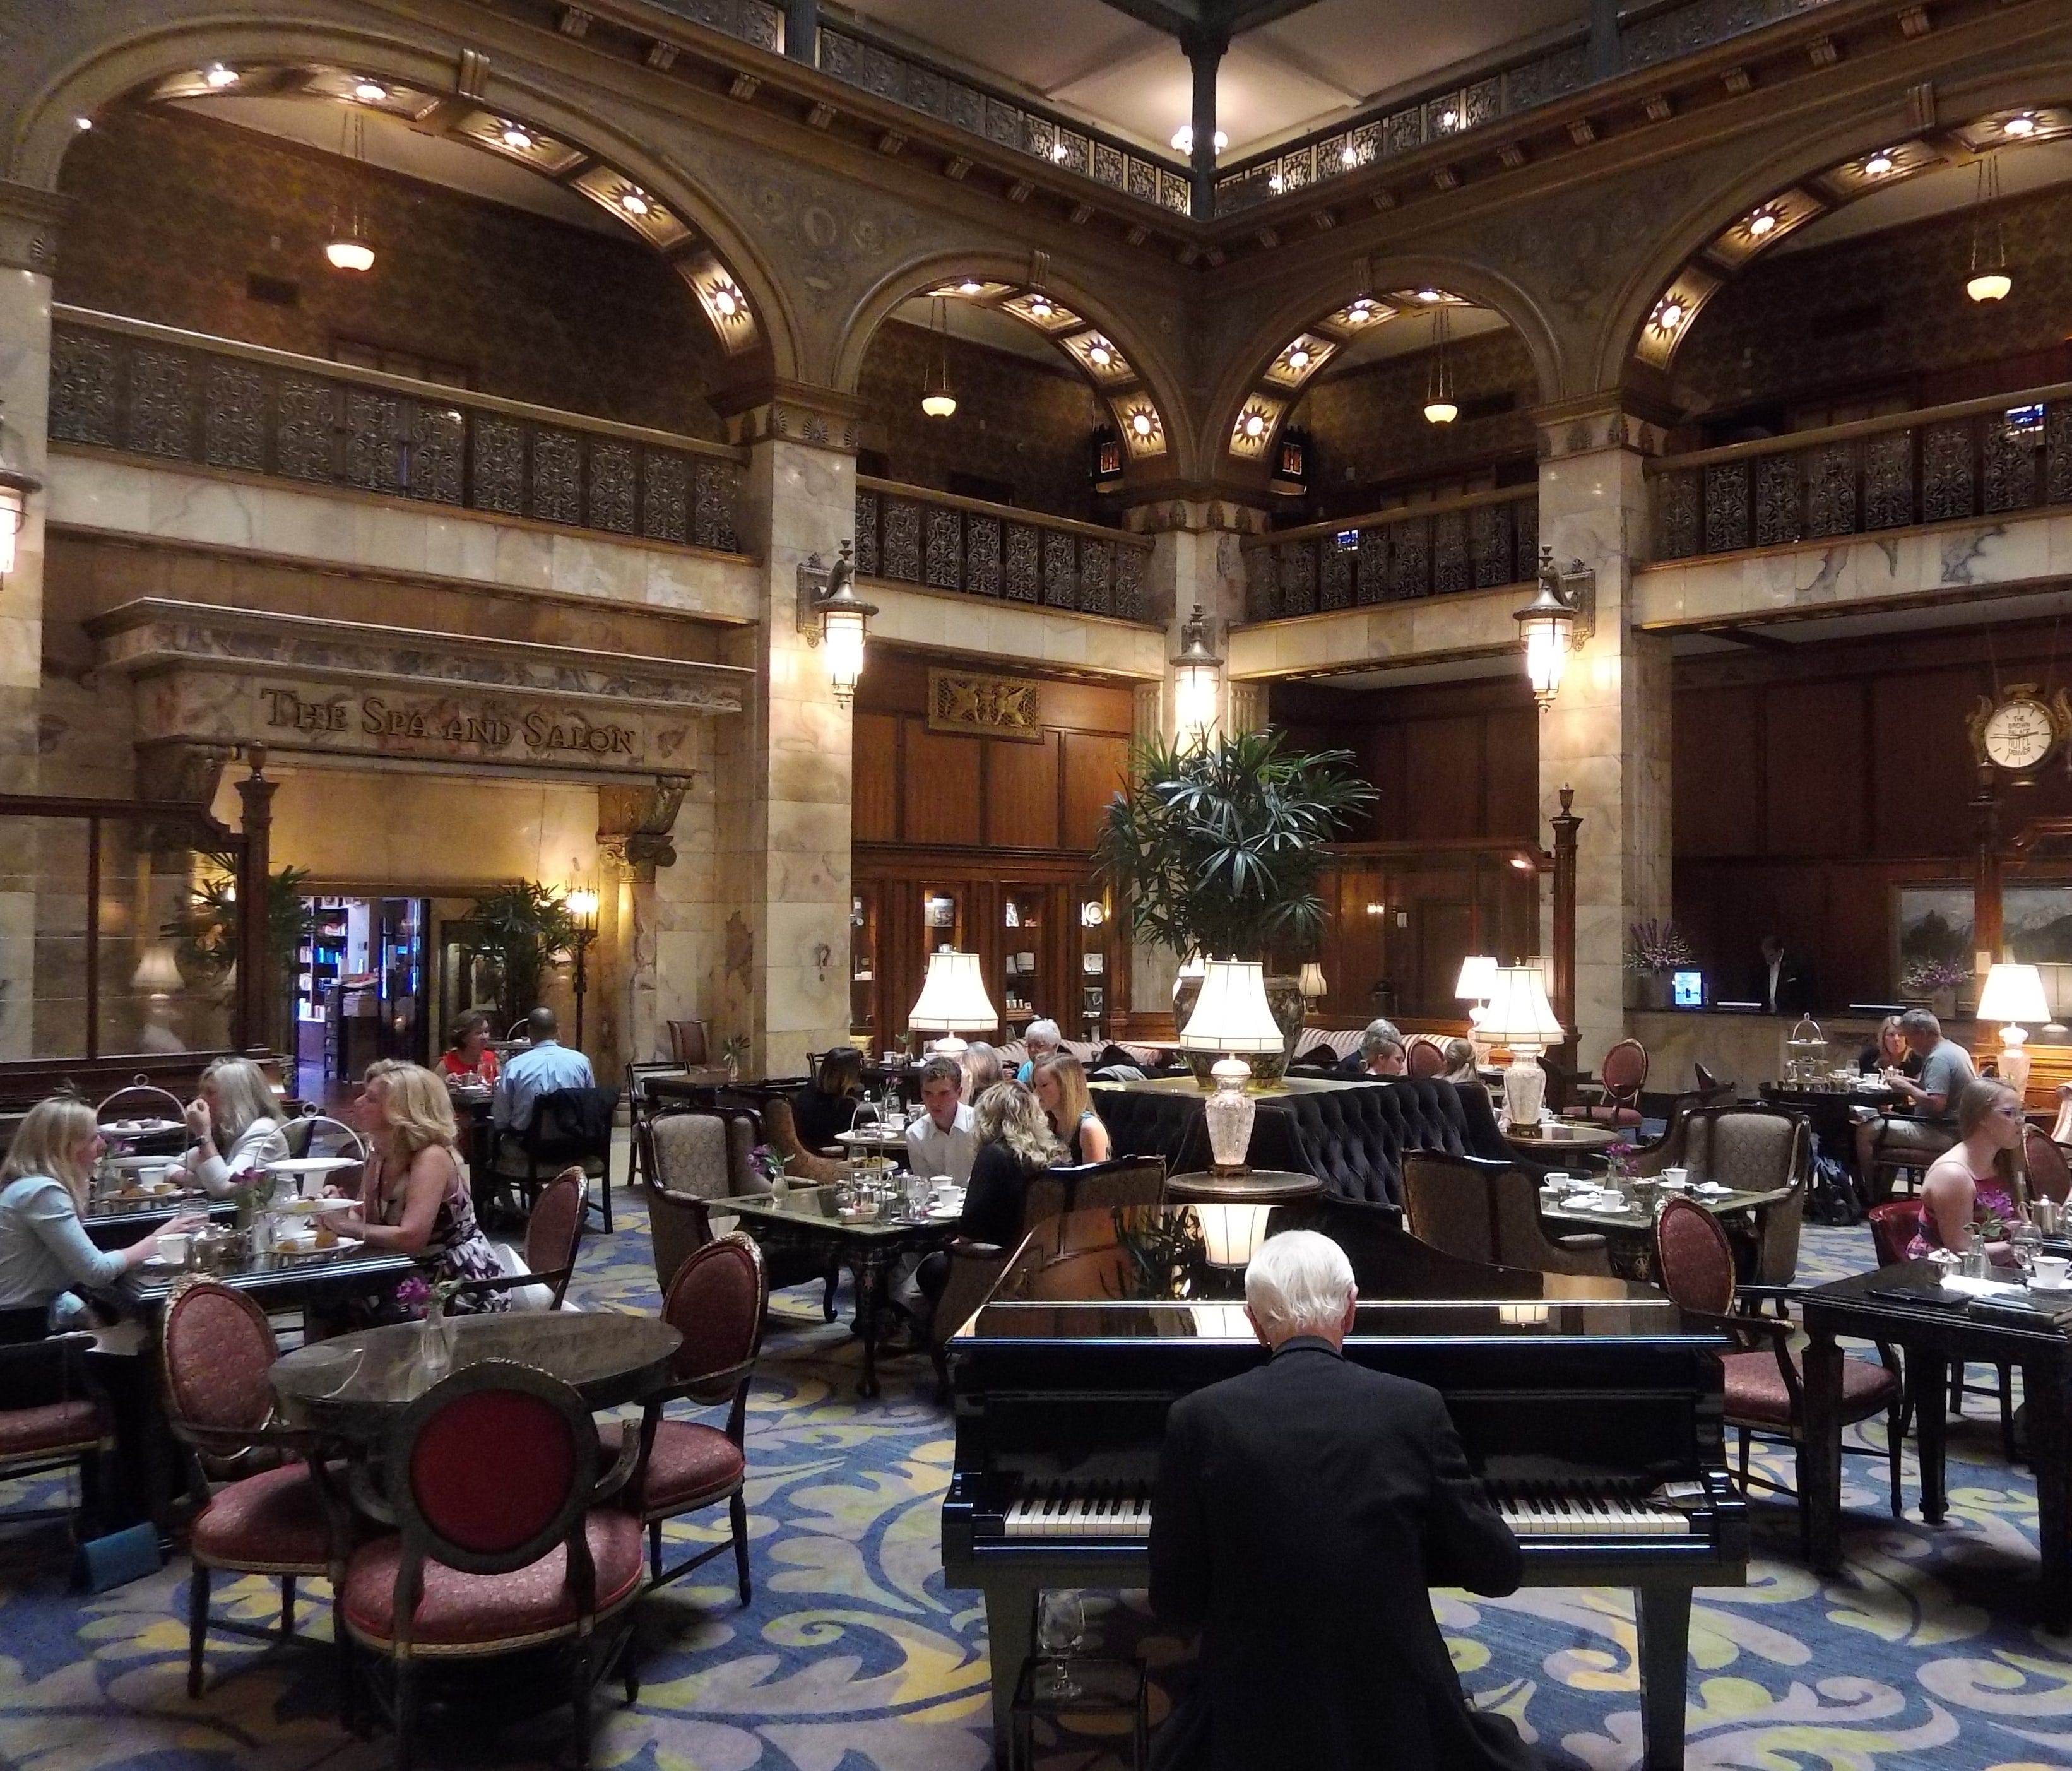 Afternoon tea, complete with live music, is offered in the hotel's atrium daily from noon to 4 p.m.